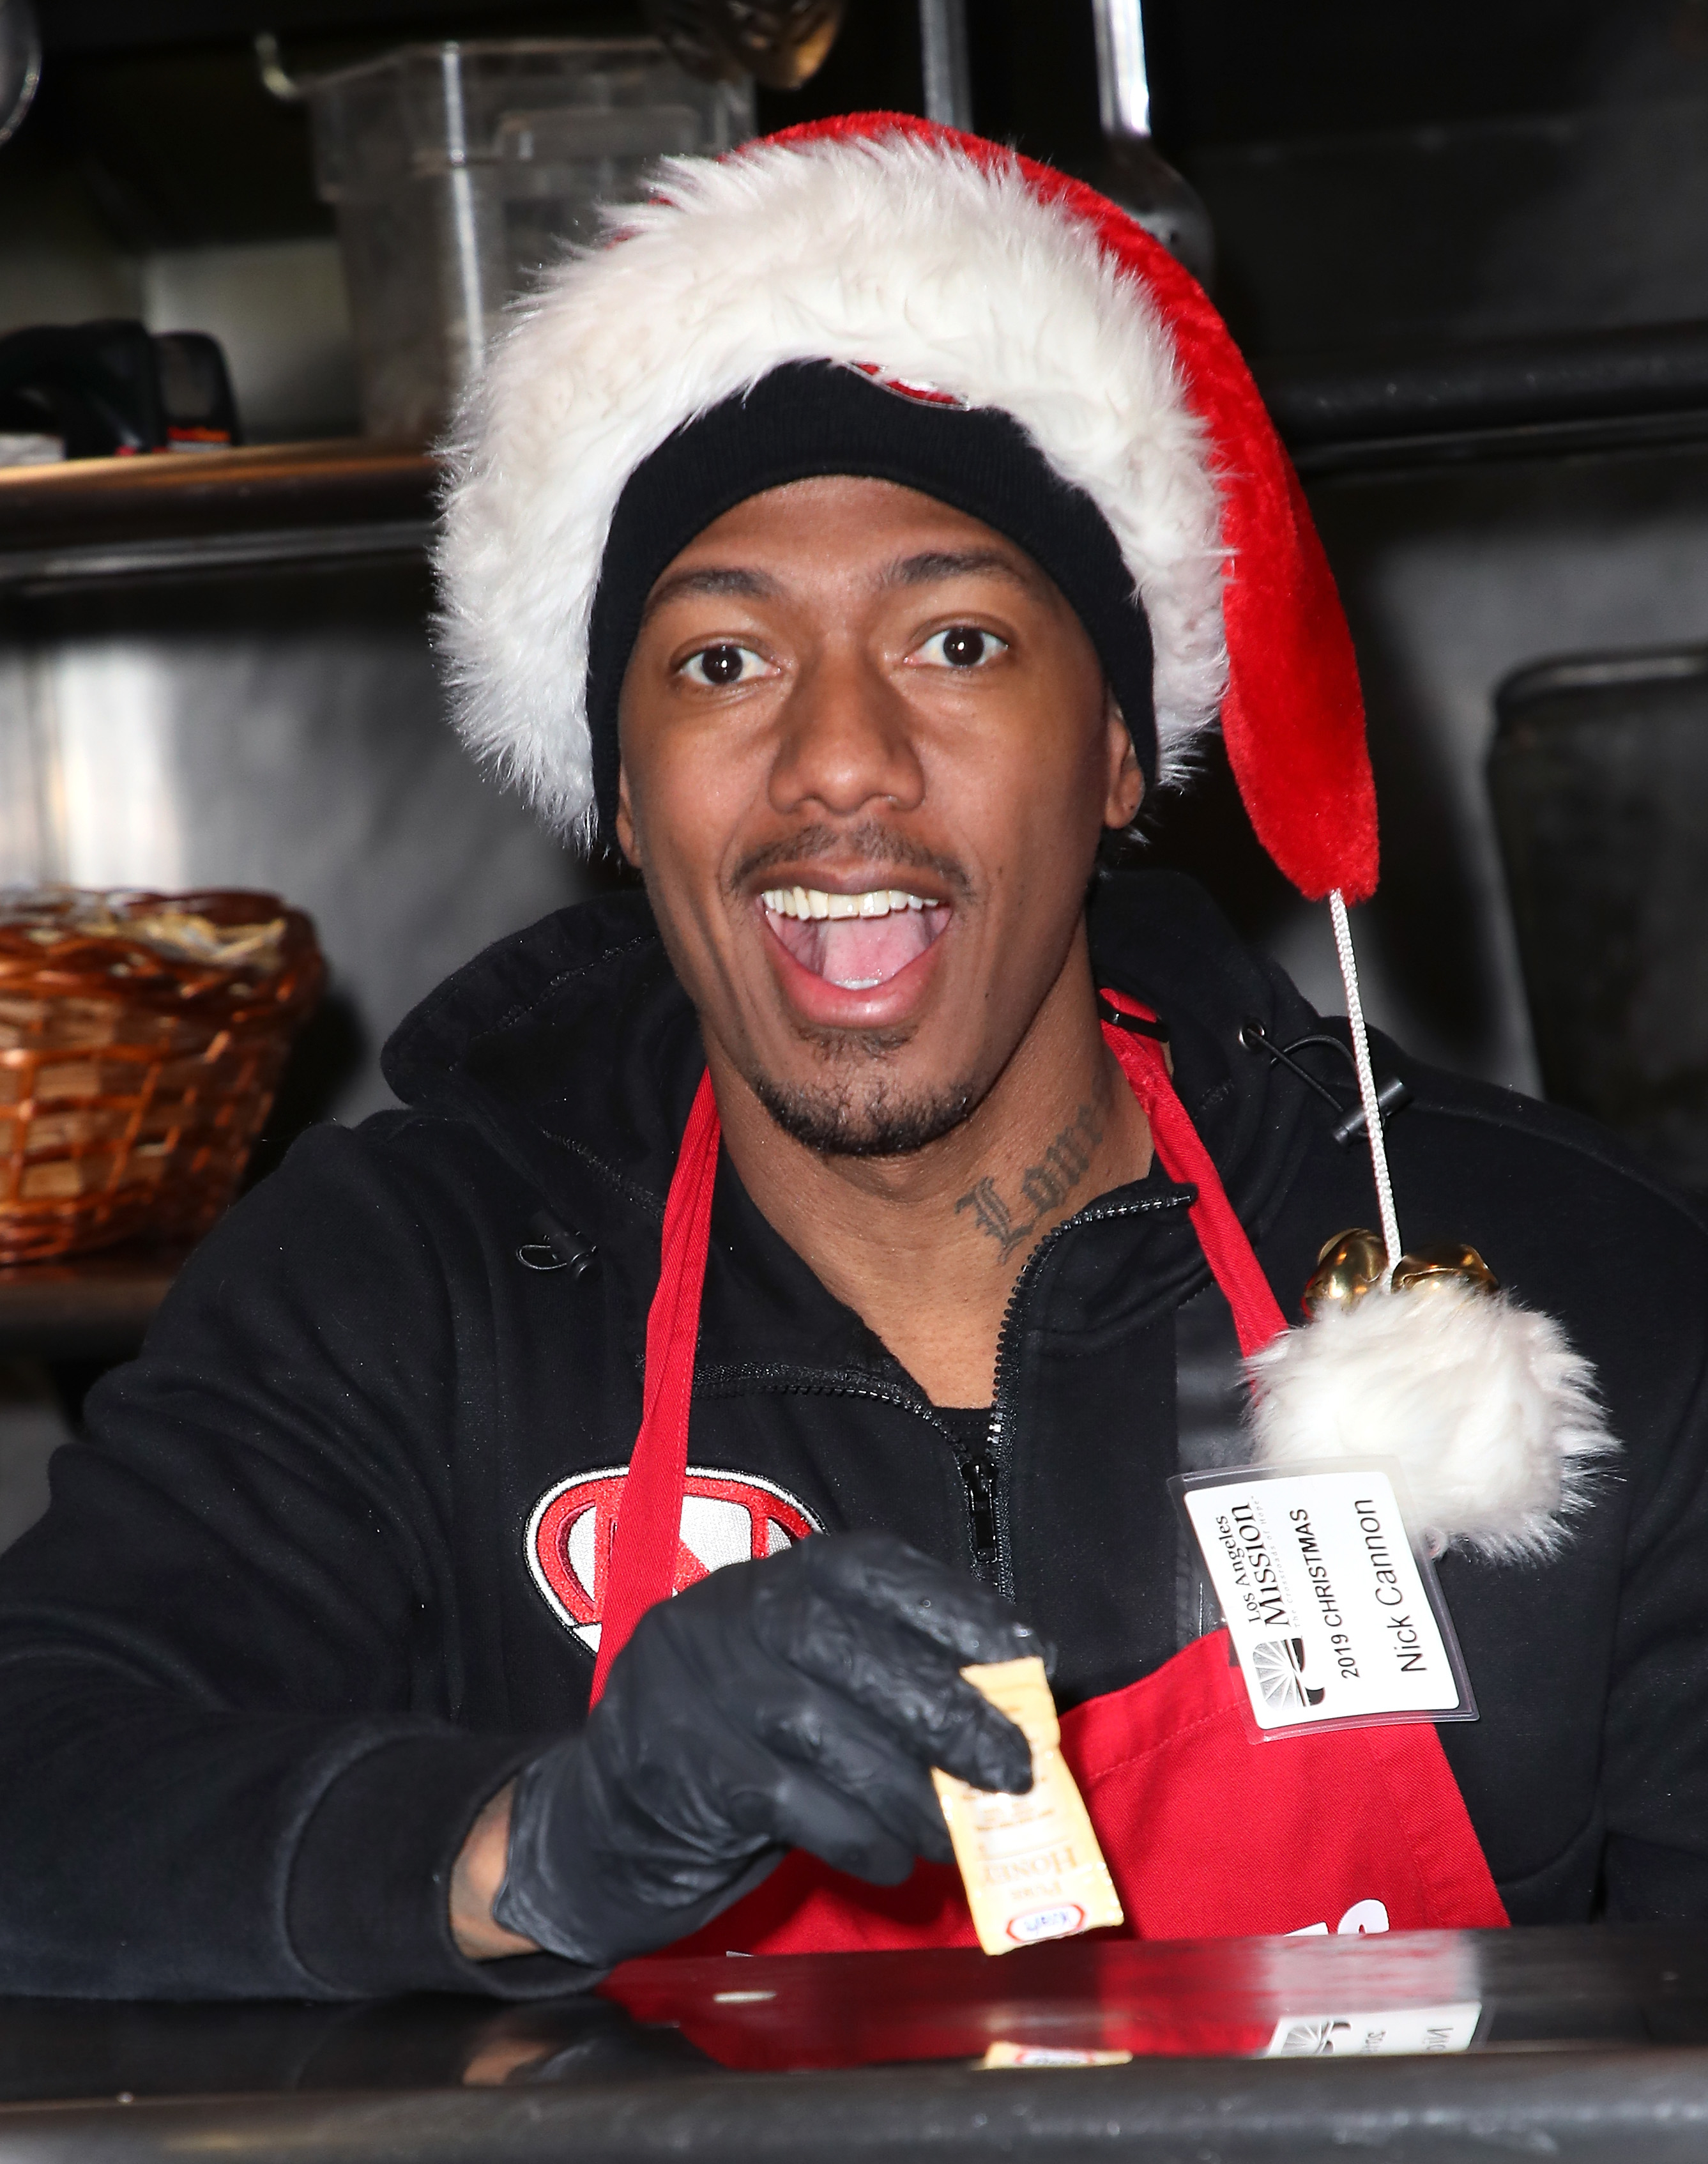 Nick in a Santa hat serving at an event, smiling, wearing a name badge and black gloves